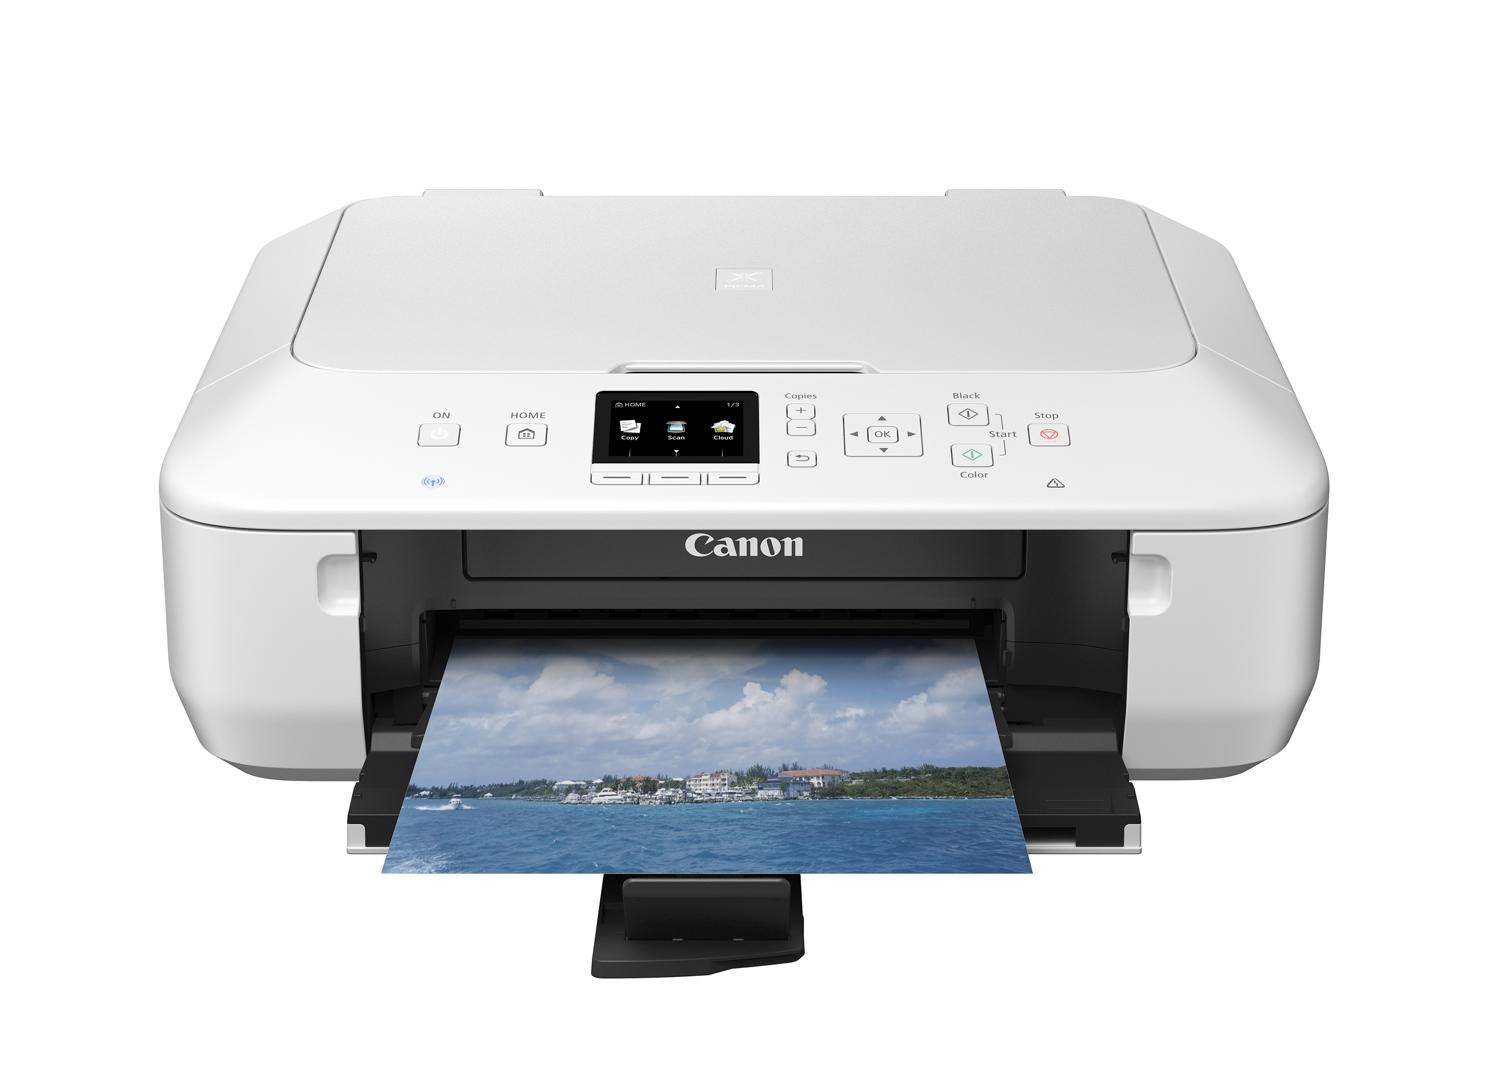 Canon PIXMA MG5520 Drivers Download For Windows 7, 8, 10 32/64-Bit